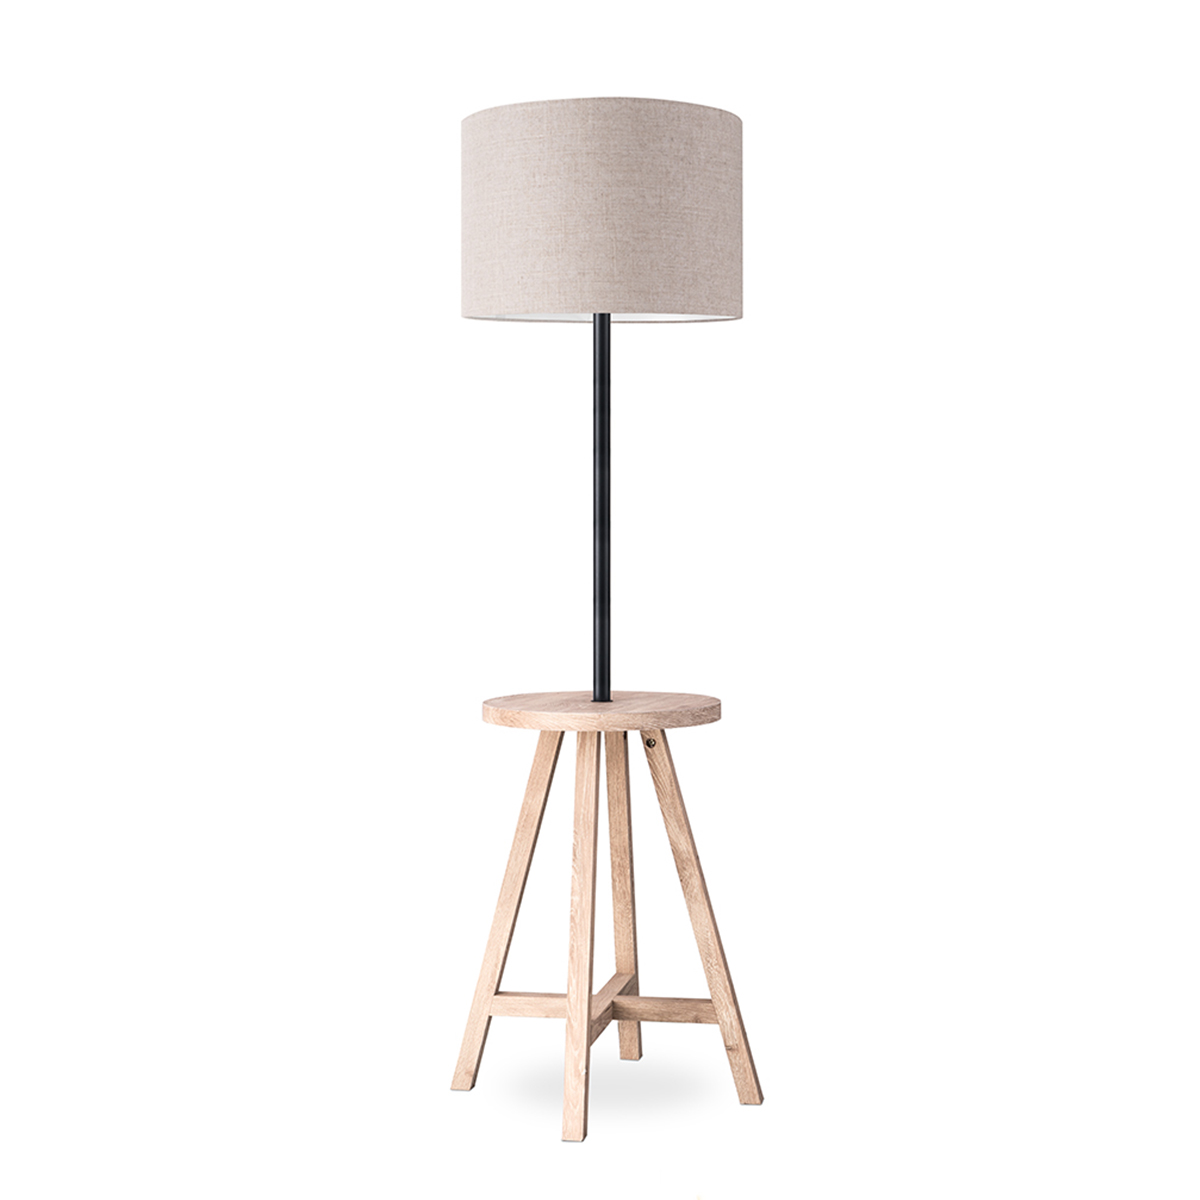 Tangla lighting - TLF7030-01NT - LED floor lamp 1 Light - wood and TC fabric in natural and  grey - E27